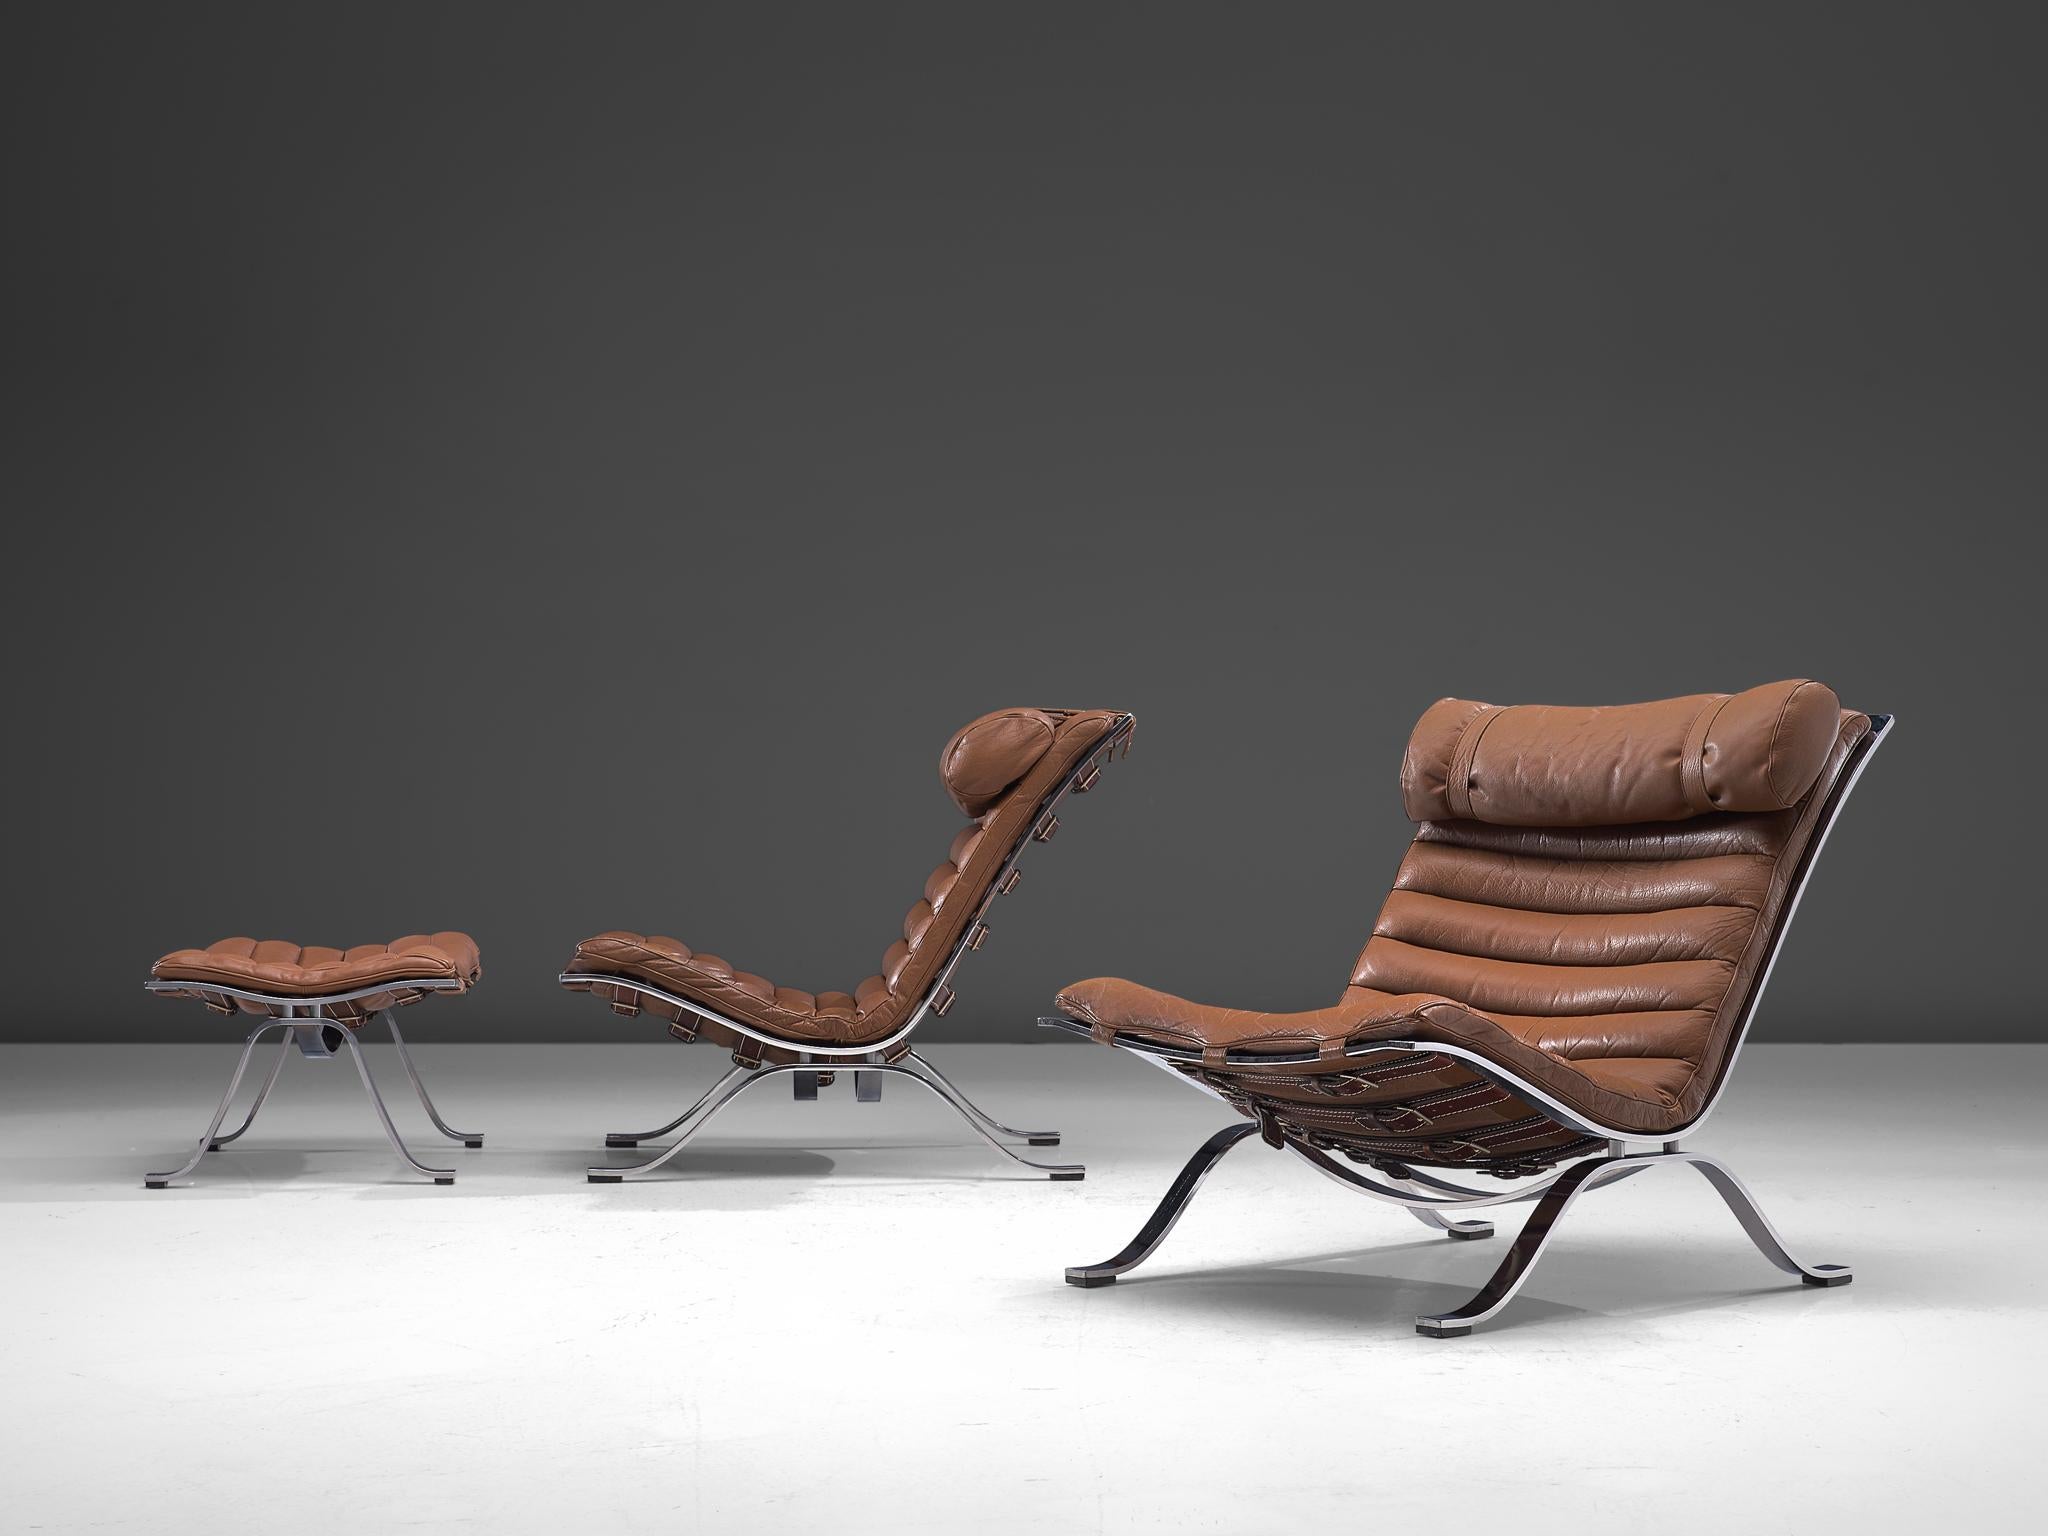 Arne Norell for Norell Møbel AB, pair 'Ari' lounge chairs with ottoman, brown leather, chrome-plated steel, Sweden, 1966. 

This pair of lounge chairs with pouf are designed by Arne Norell. The whole frame is executed in chrome-plated steel, and